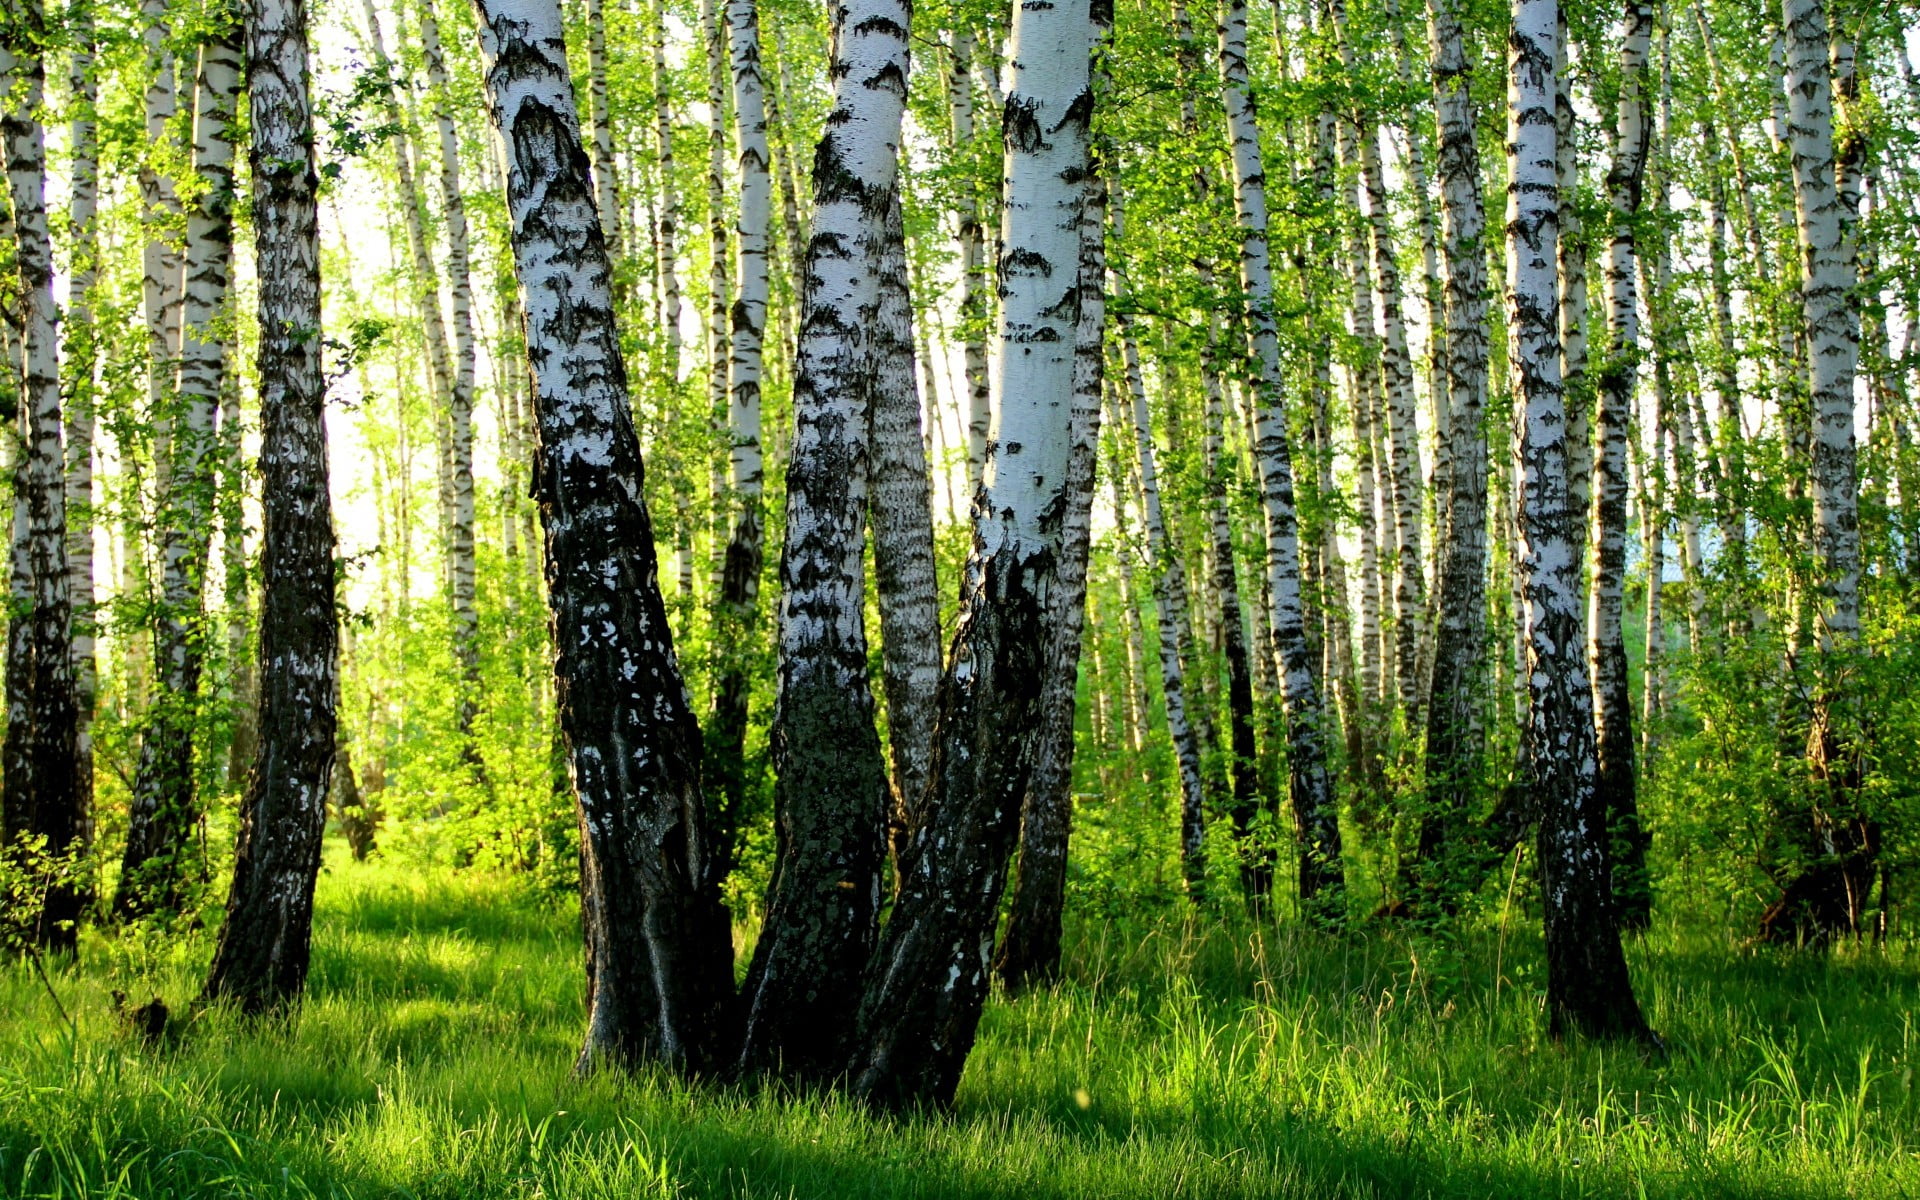 forest trees field, forest, nature, birch, trees